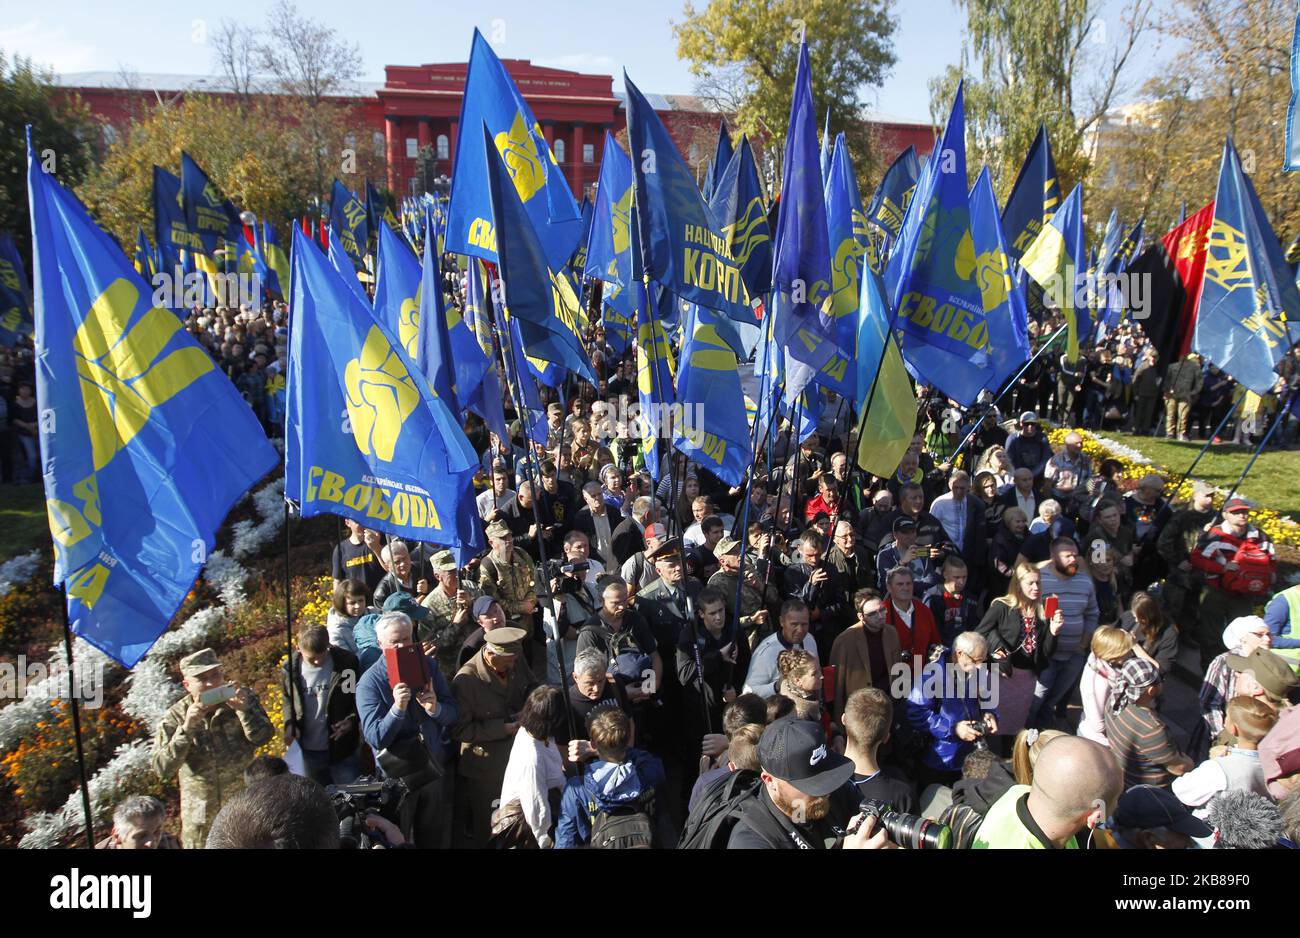 Ukrainians take part at a march to the 77th anniversary of the founding of the Ukrainian Insurgent Army in central Kiev, Ukraine, on 14 October, 2019. Thousands activists of different nationalist parties and movements marched in the center of Ukrainian capital celebrating the founding of the Ukrainian Insurgent Army and Defender of Ukraine Day. The Ukrainian Insurgent Army or UPA fought for Ukrainian independence against the Red Army and the Nazi wermacht during the WWII. (Photo by STR/NurPhoto) Stock Photo